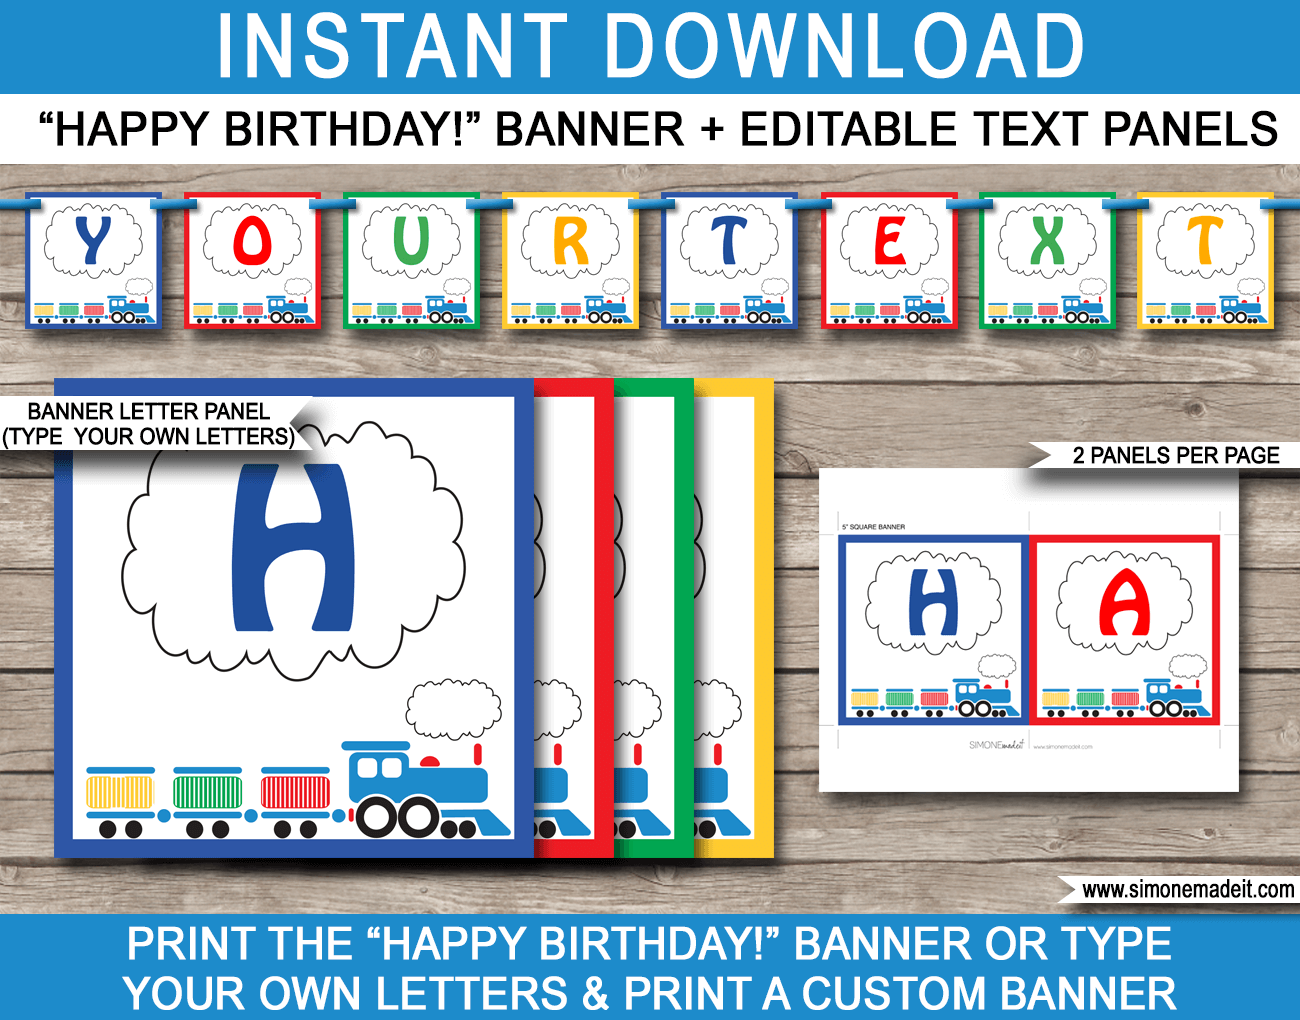 Steam Train Party Banner Template - Birthday Party Bunting - Happy Birthday Banner - Editable and Printable DIY Template - INSTANT DOWNLOAD $4.50 via simonemadeit.com